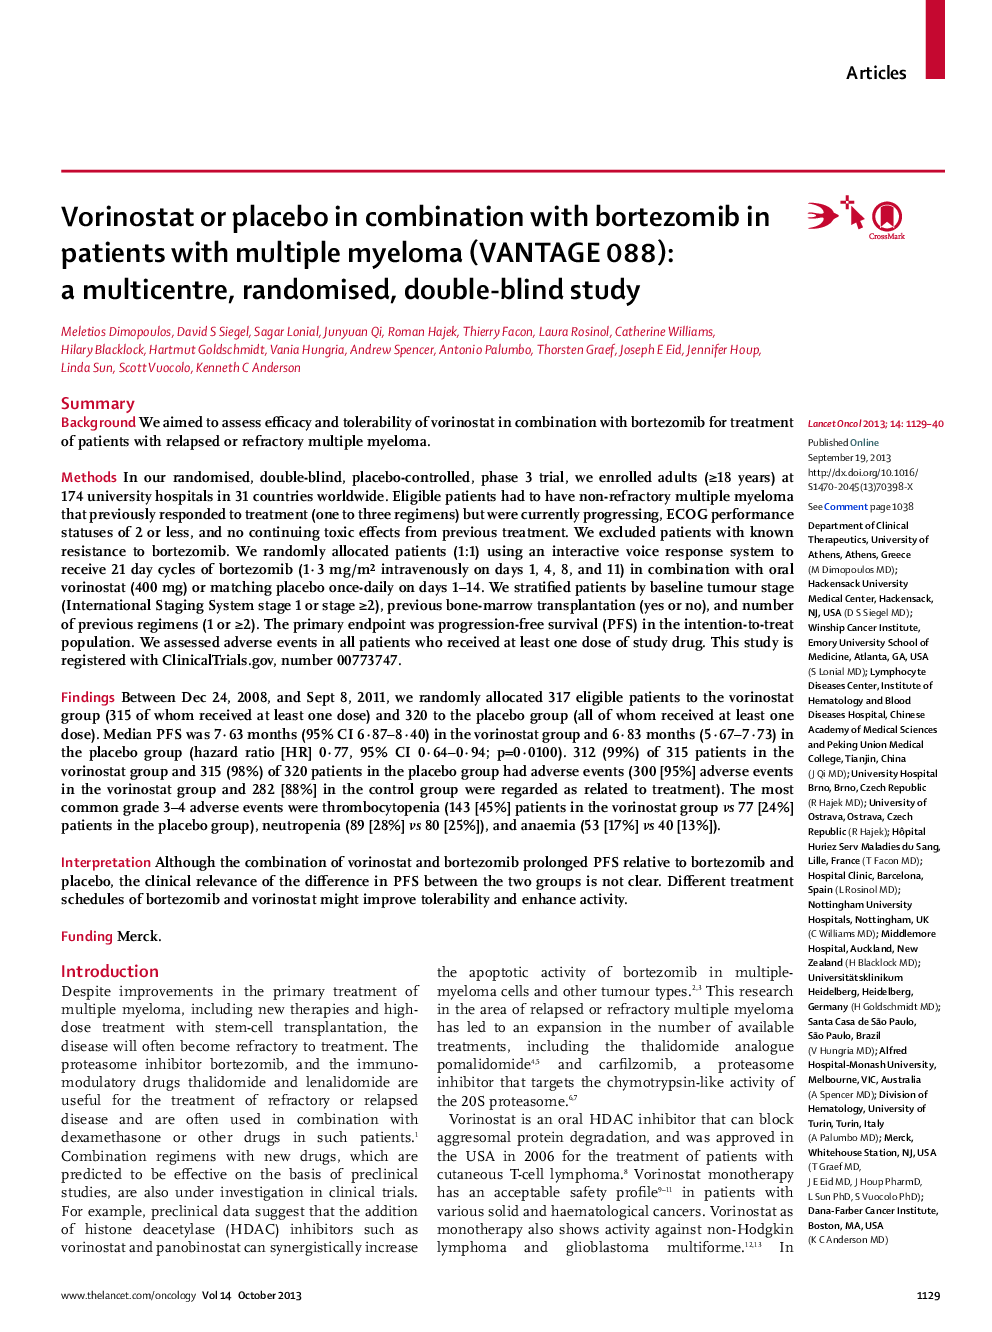 Vorinostat or placebo in combination with bortezomib in patients with multiple myeloma (VANTAGE 088): a multicentre, randomised, double-blind study